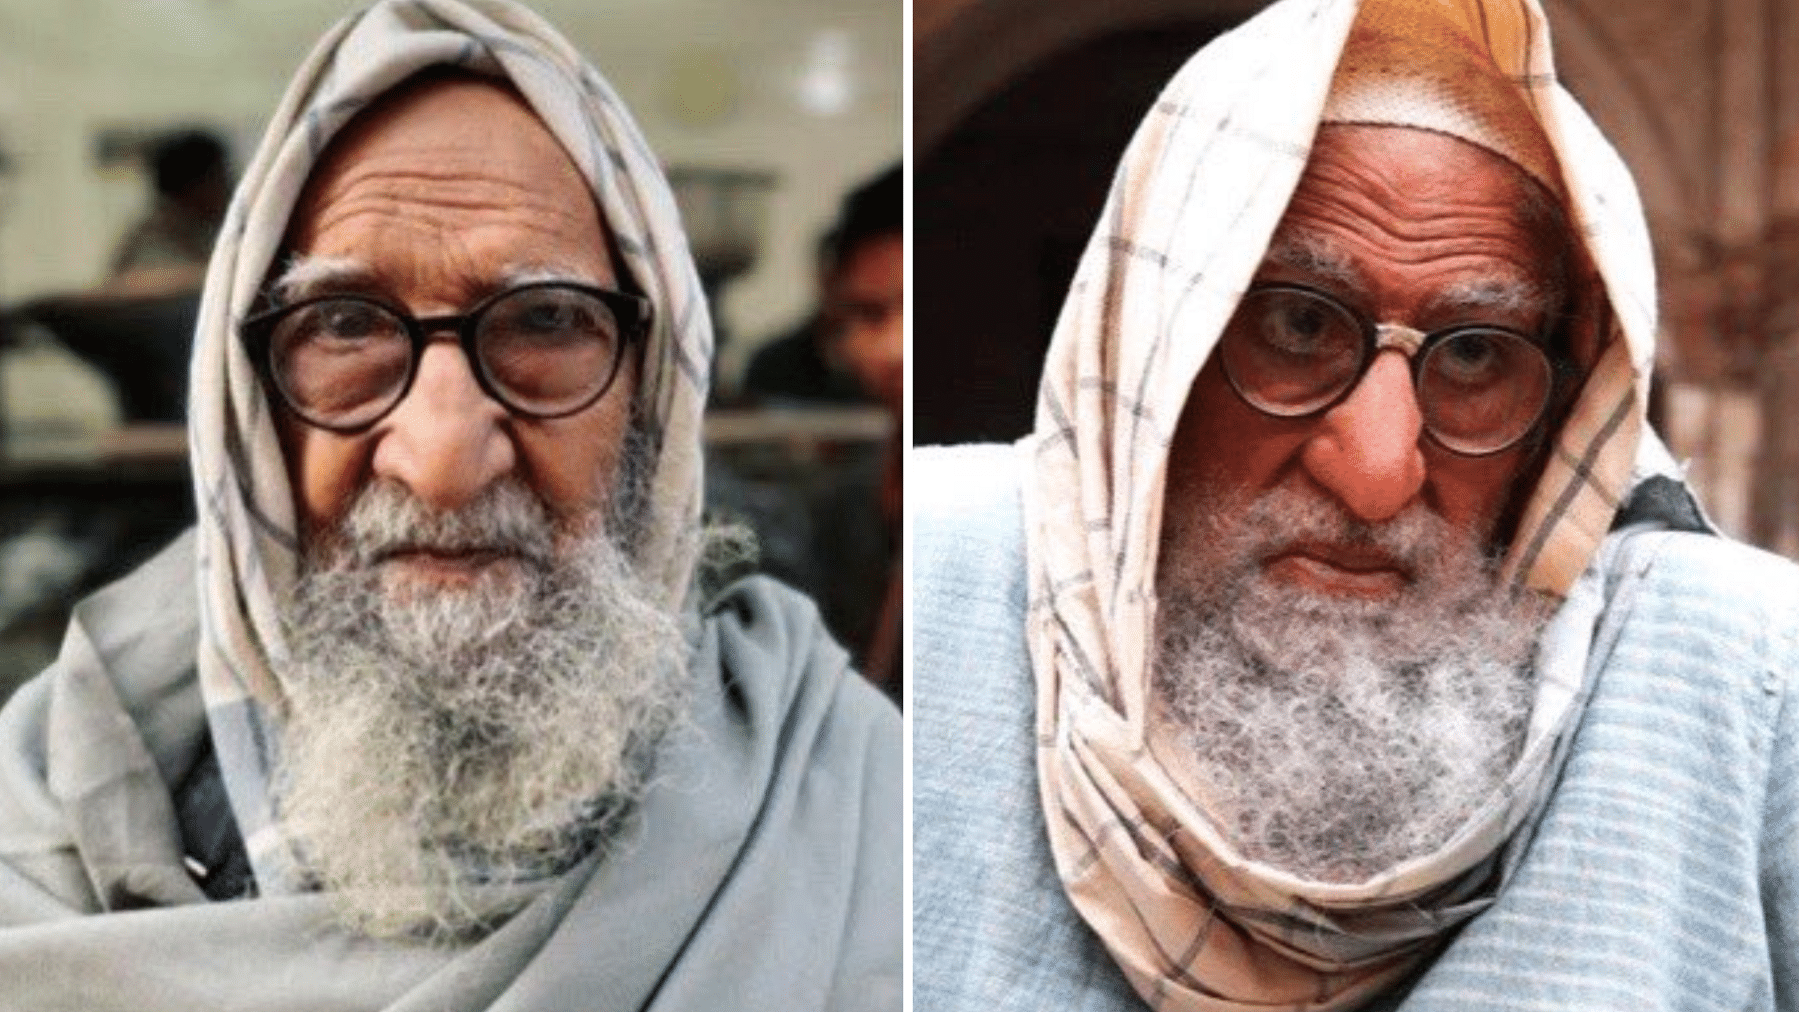 Delhi based photojournalist shares a portrait of a man he clicked last year which has an uncanny similarity with Big B’s ‘Gulaabo Sitaabo’ look.